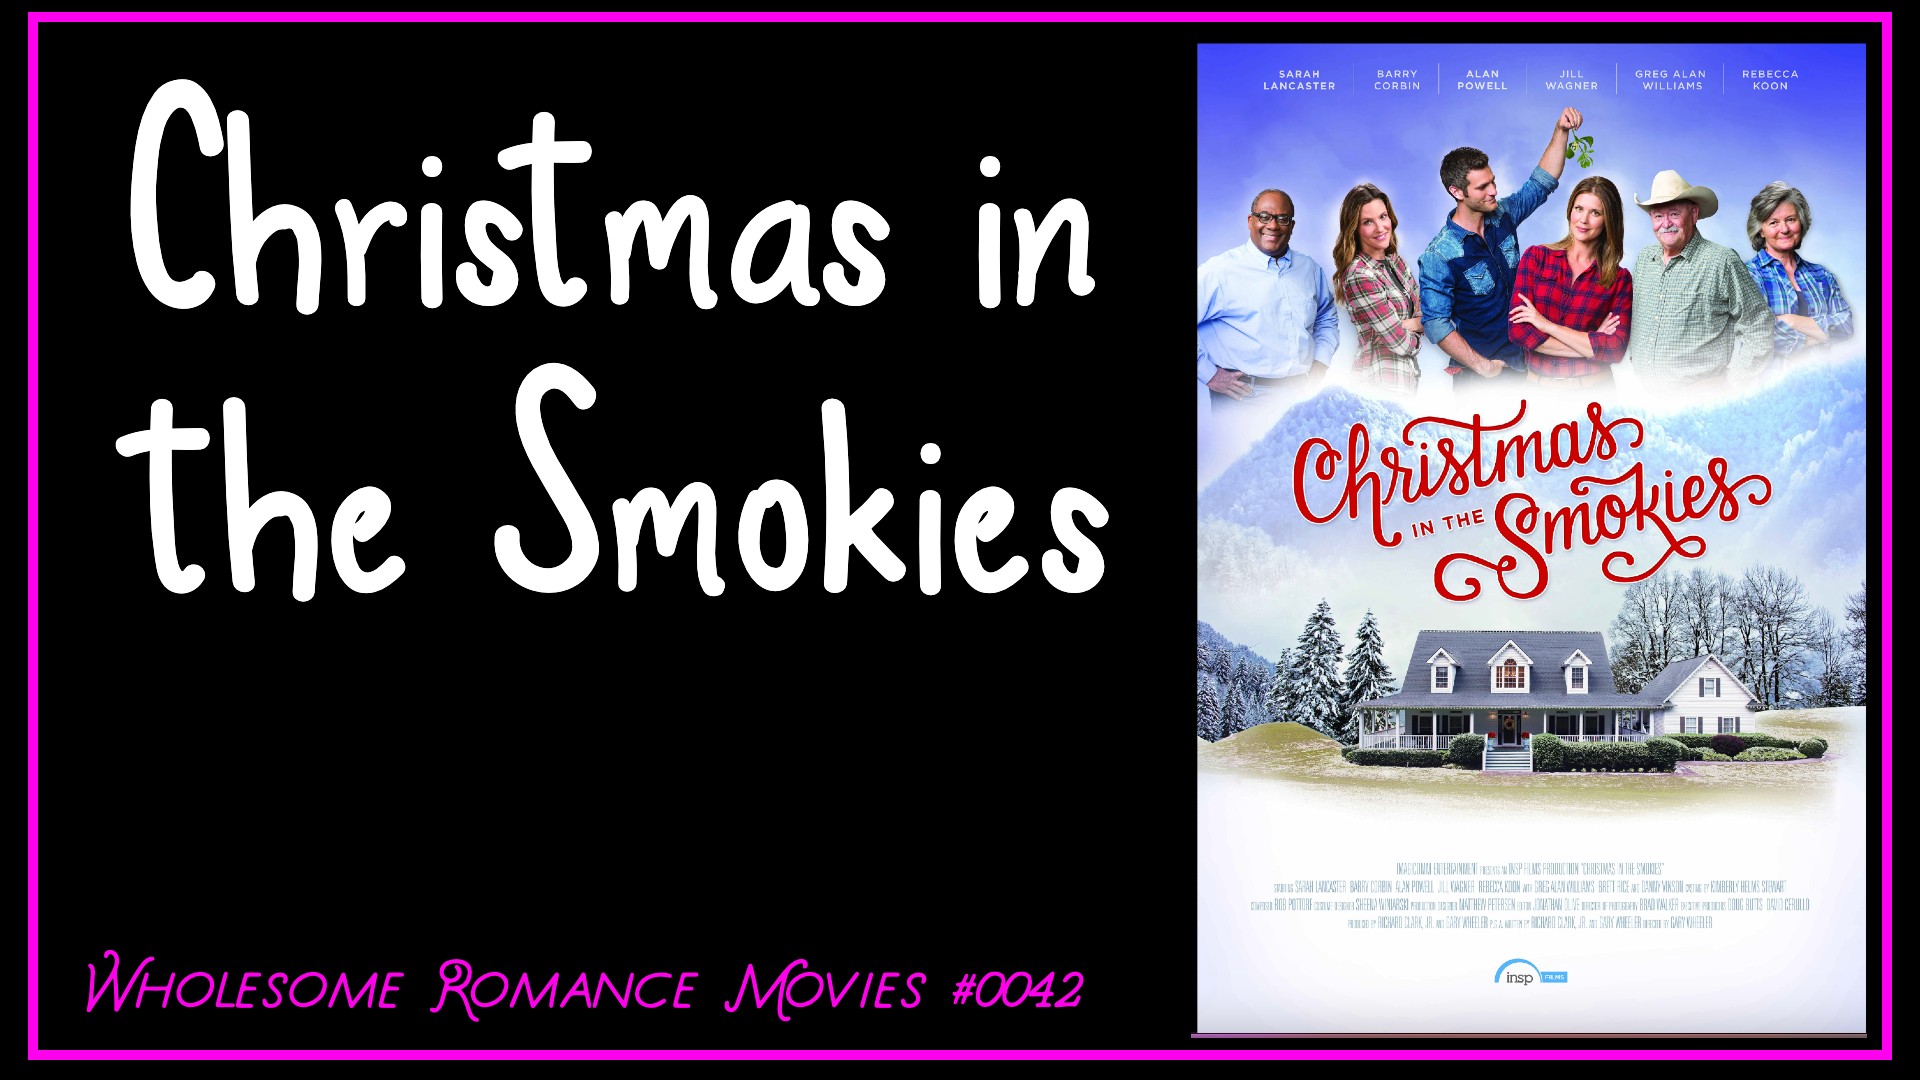 Christmas in the Smokies (2015) WRM Review